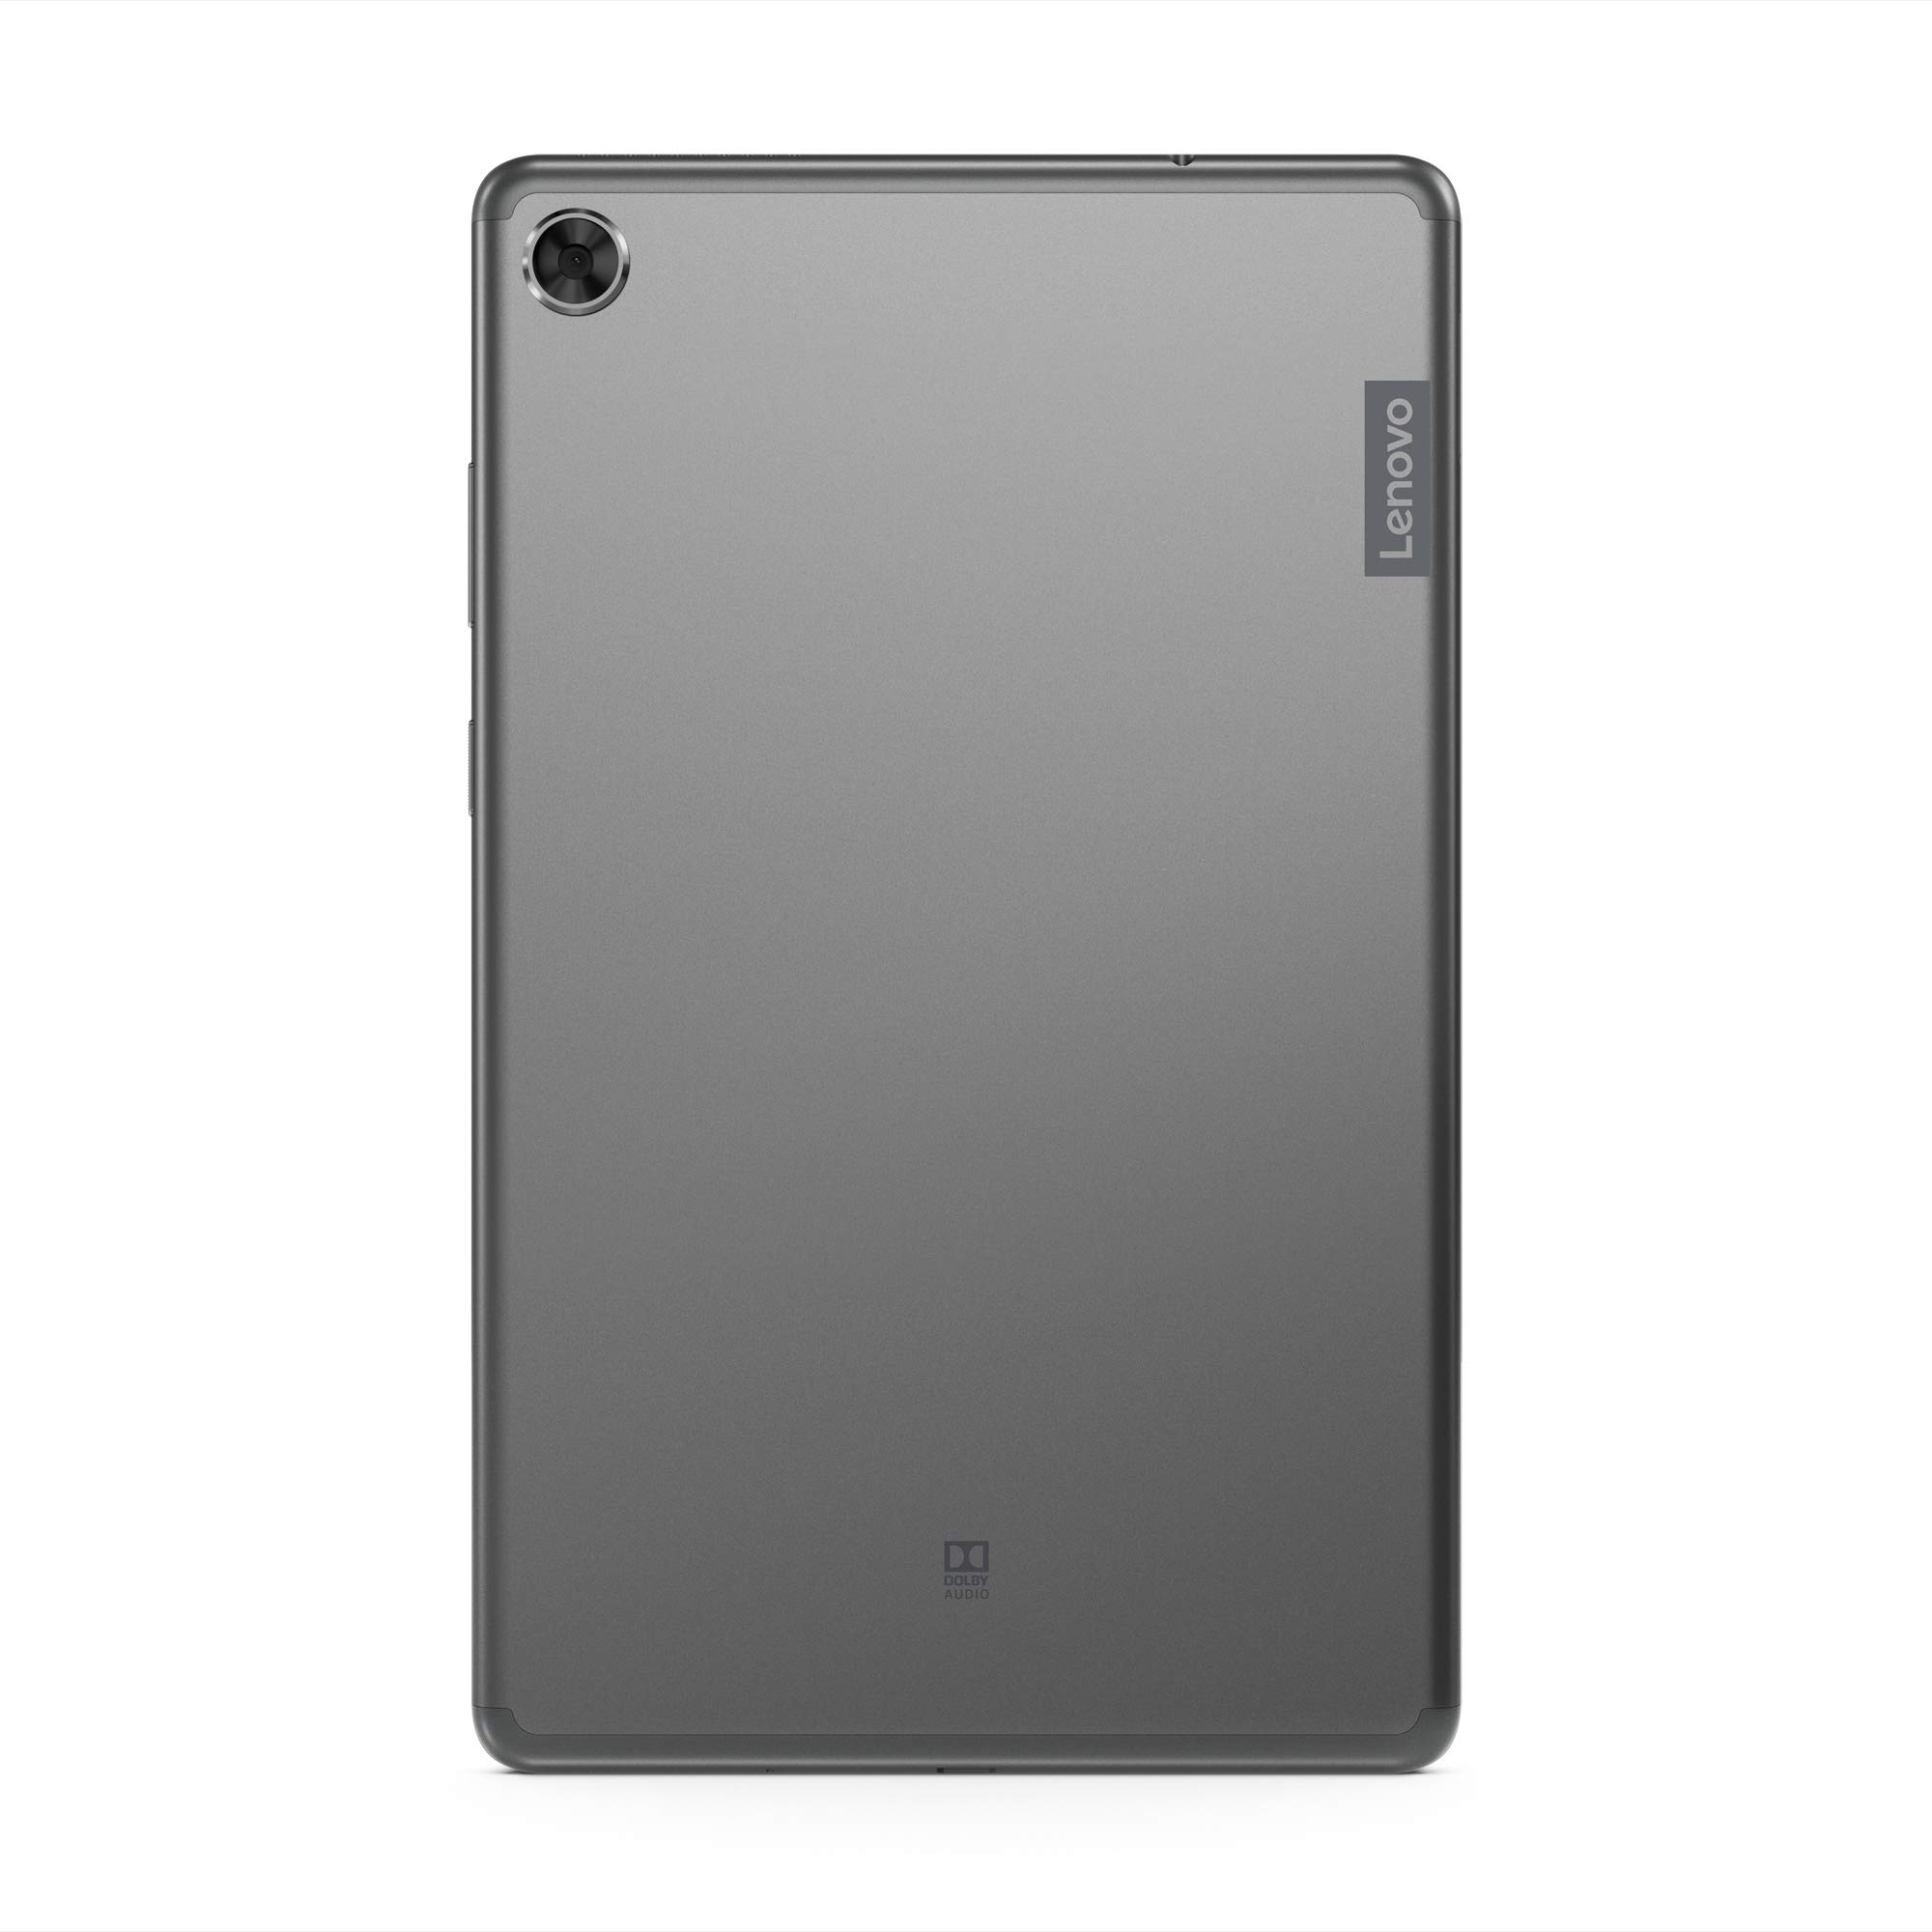 Lenovo Tab M8 Tablet, HD Android Tablet, Quad-Core Processor, 2GHz, 16GB Storage, Full Metal Cover, Long Battery Life, Android 9 Pie, Slate Black